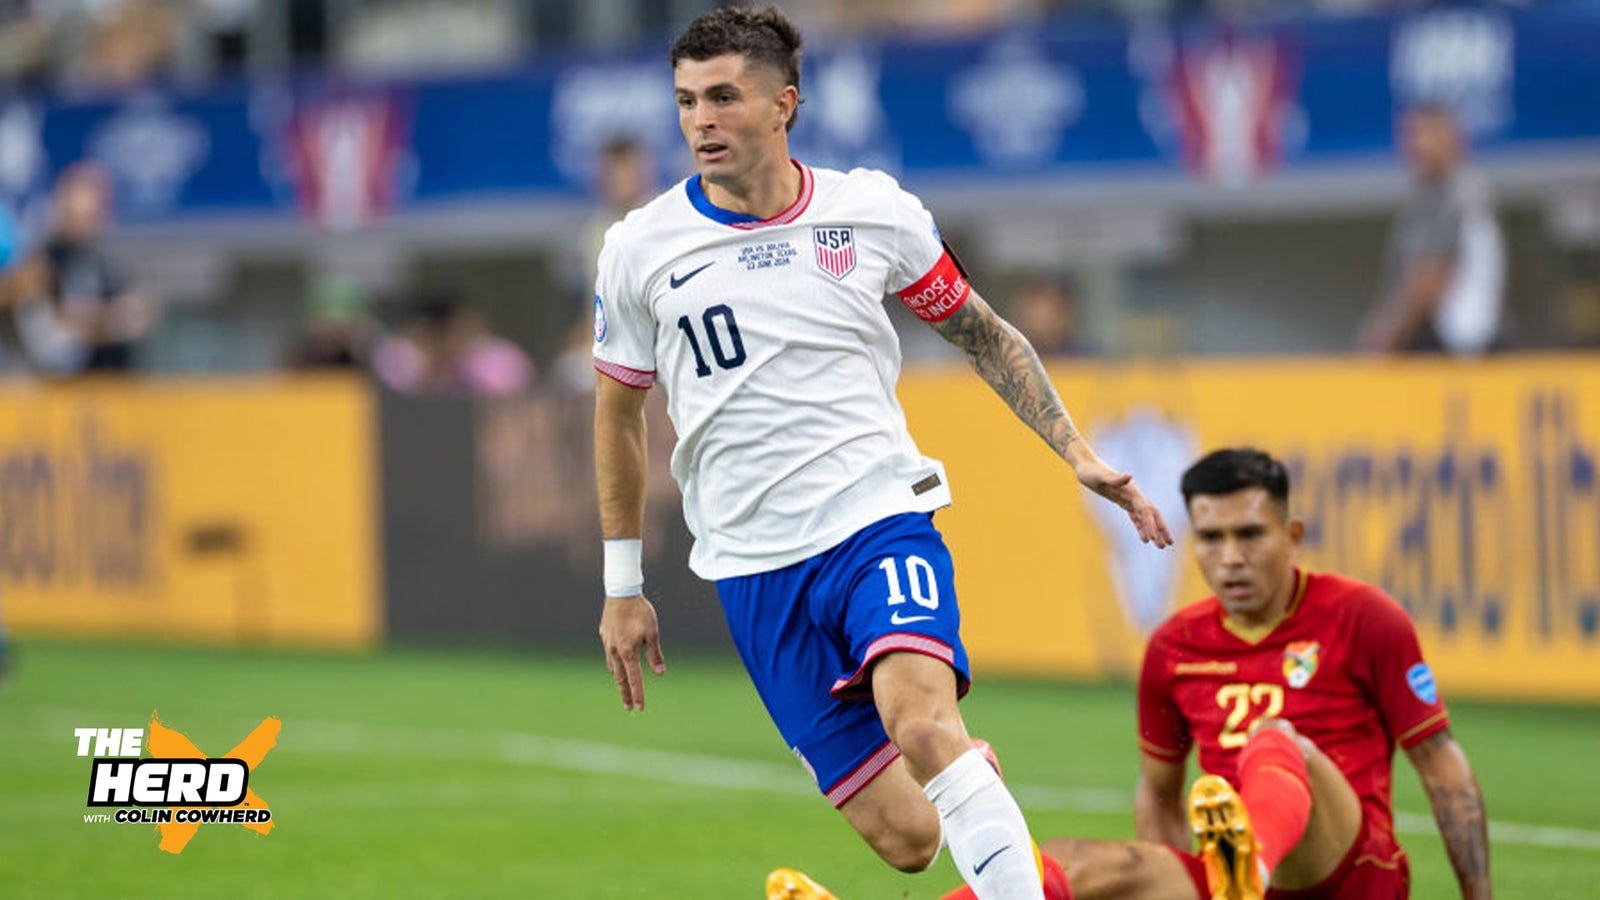 Can Christian Pulisic lead USMNT to a win vs. Panama and Group C?